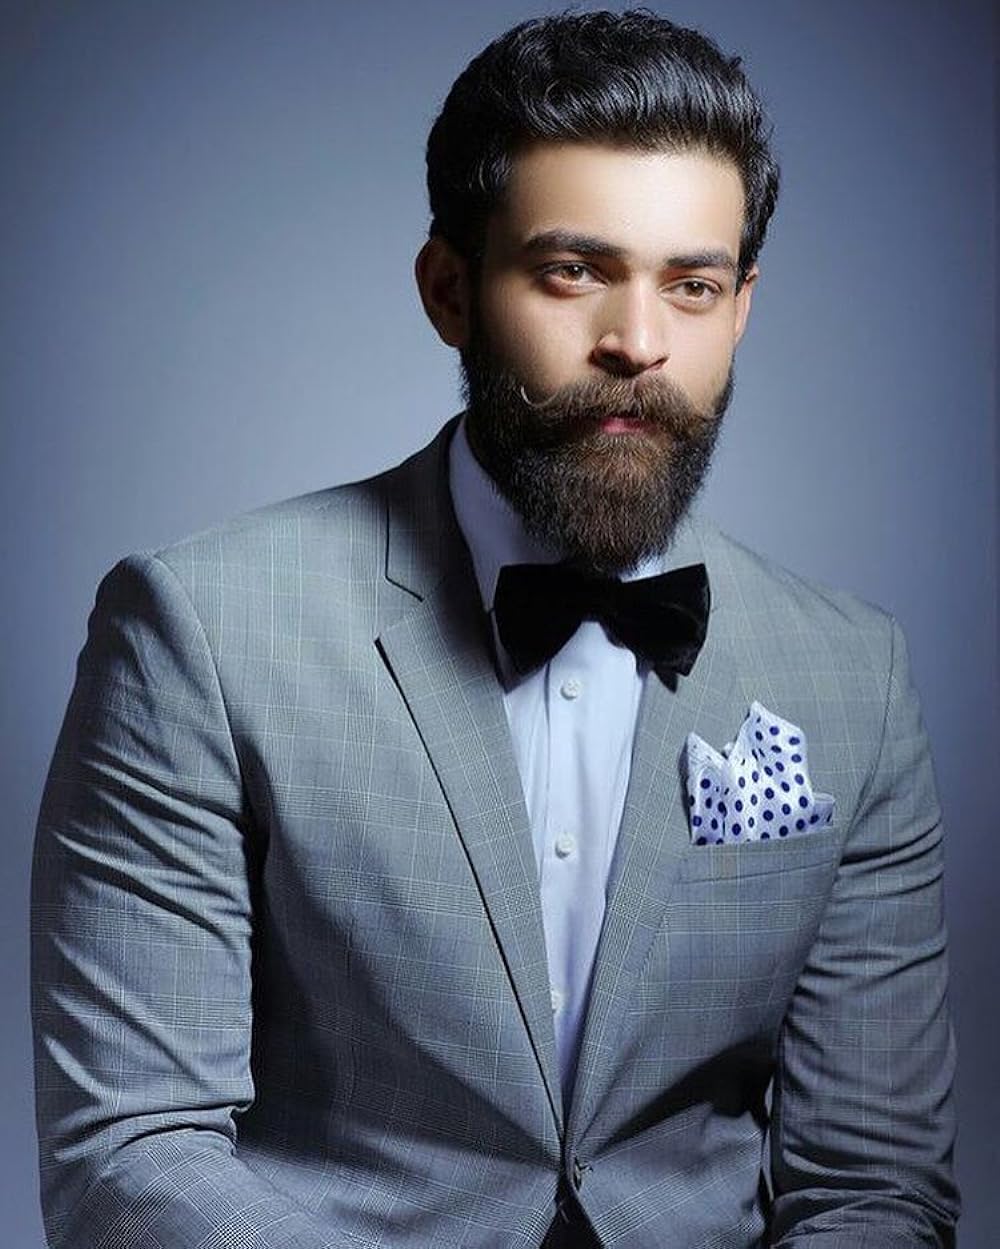 Varun Tej: Known for his height and good looks, Varun made his debut as a lead in the film Mukunda (2014). He starred in the critically acclaimed war film Kanche (2015), directed by Krish. His commercially successful films are Fidaa (2017), Tholi Prema (2018), F2: Fun and Frustration (2019) and Gaddalakonda Ganesh (2019). Varun Tej is the son of Nagendra Babu. The actor recently tied the knot with Lavanya Tripathi.